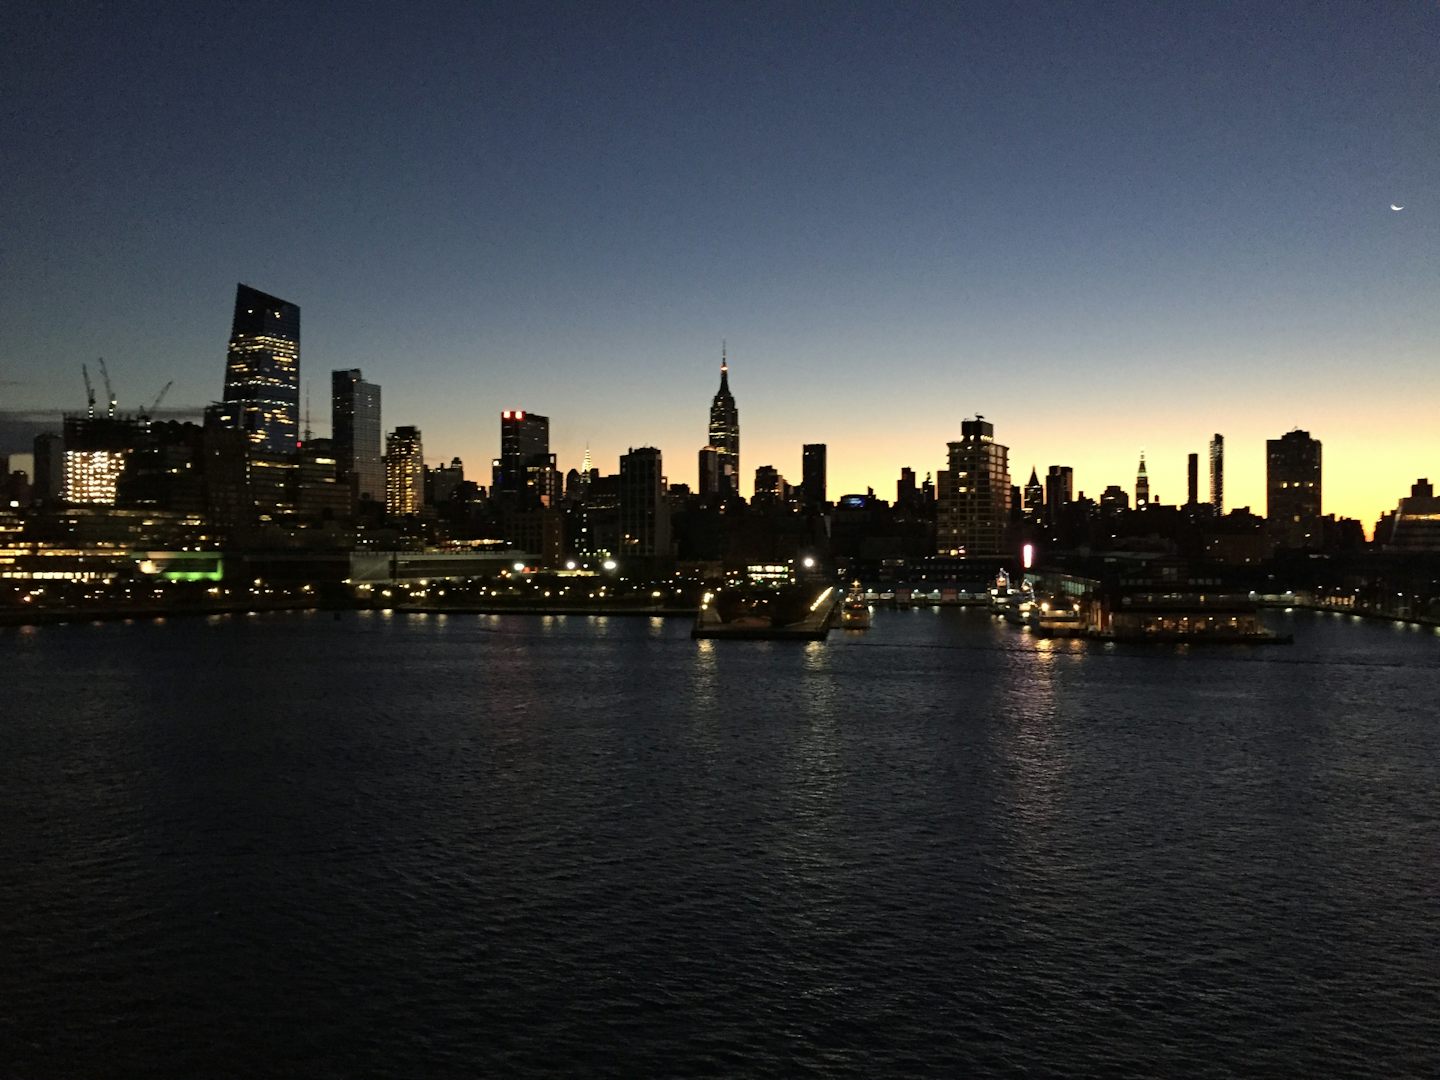 Beautiful view from our balcony the morning we returned to NYC port.